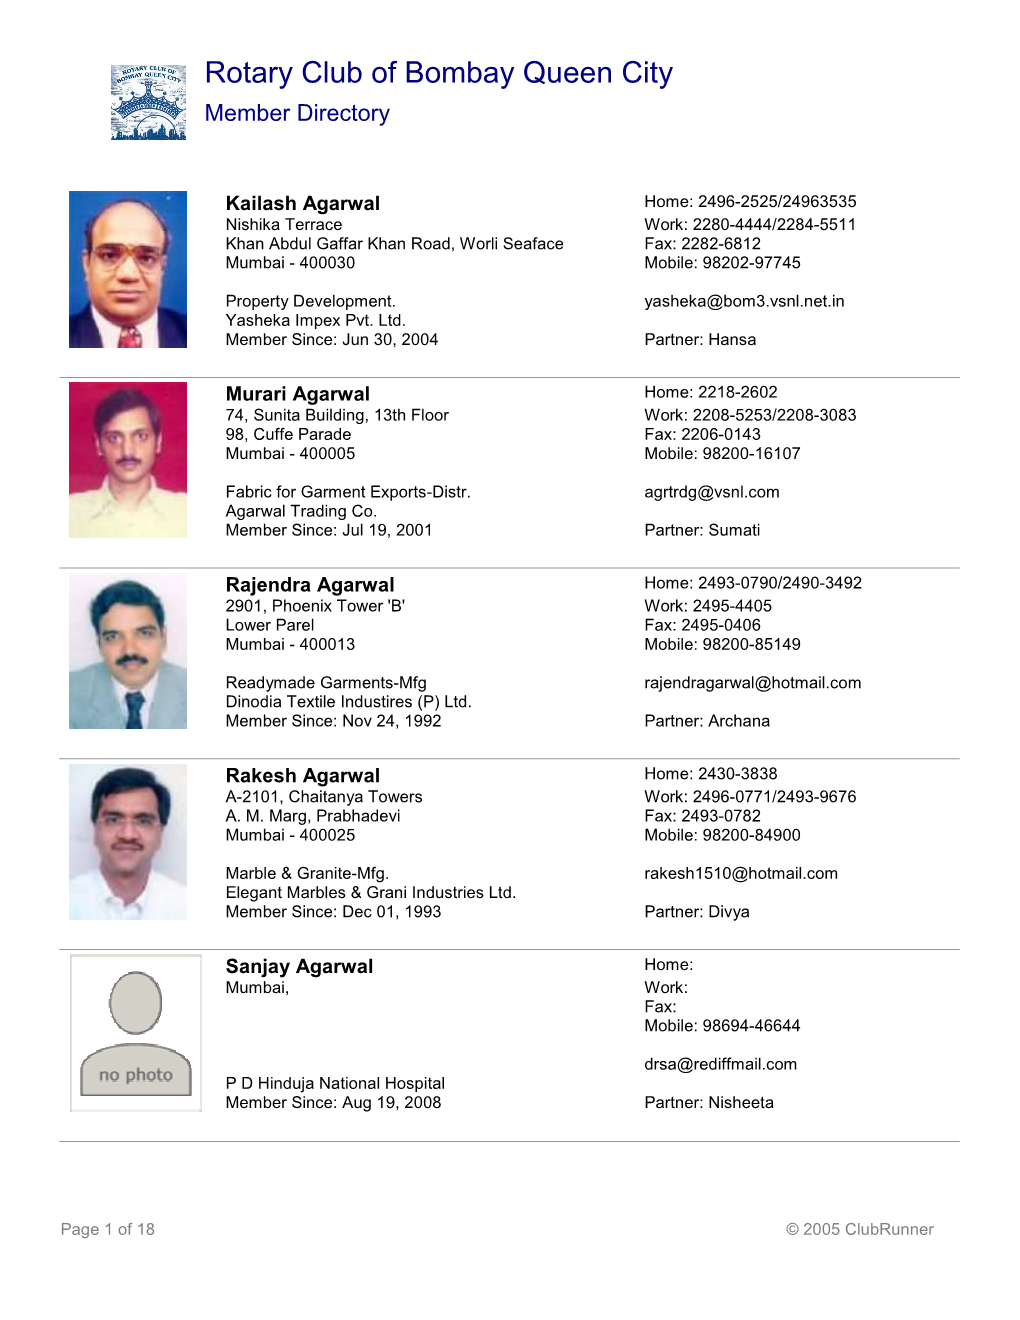 Rotary Club of Bombay Queen City Member Directory